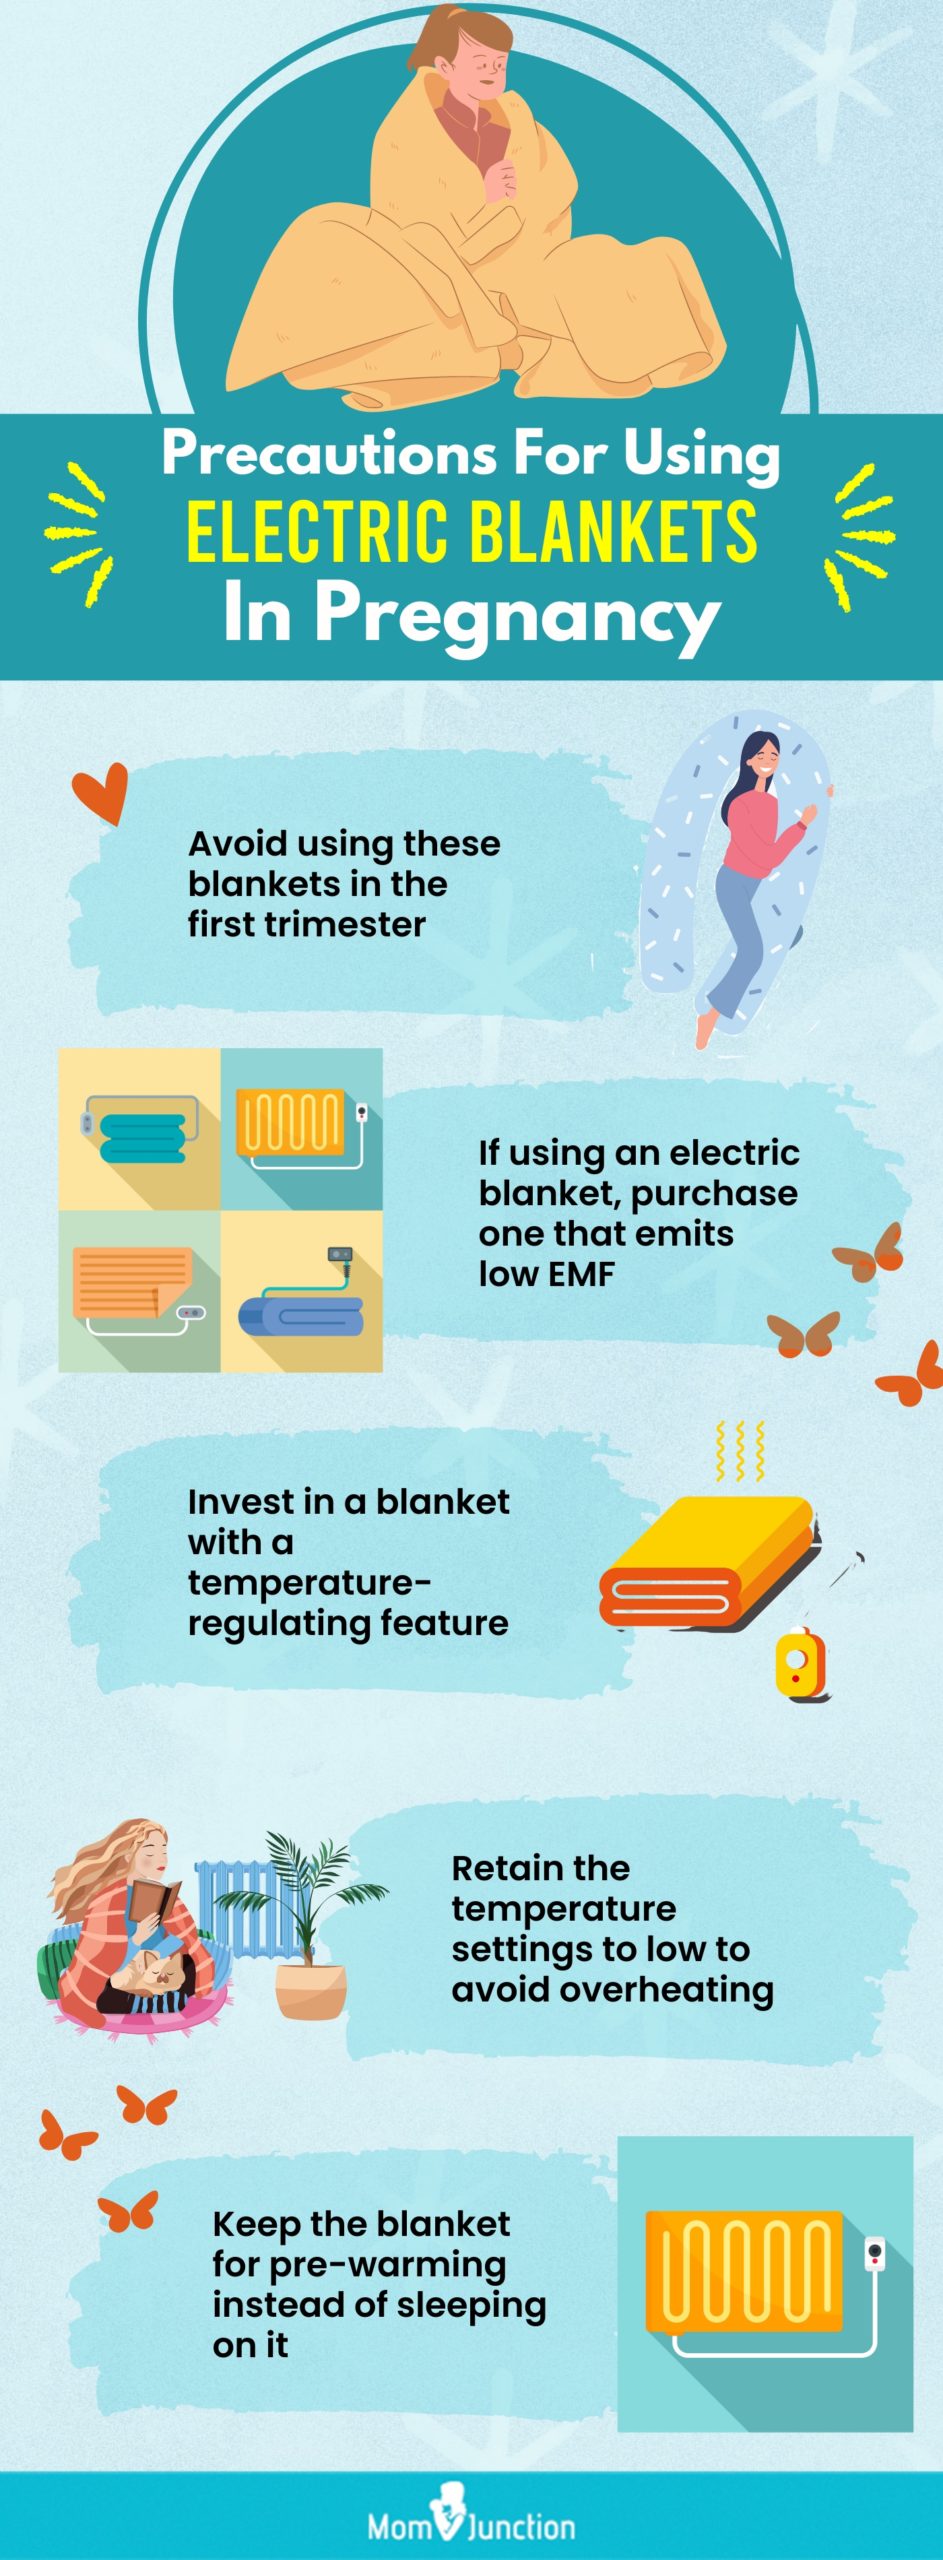 precautions for using electric blankets in pregnancy (infographic)